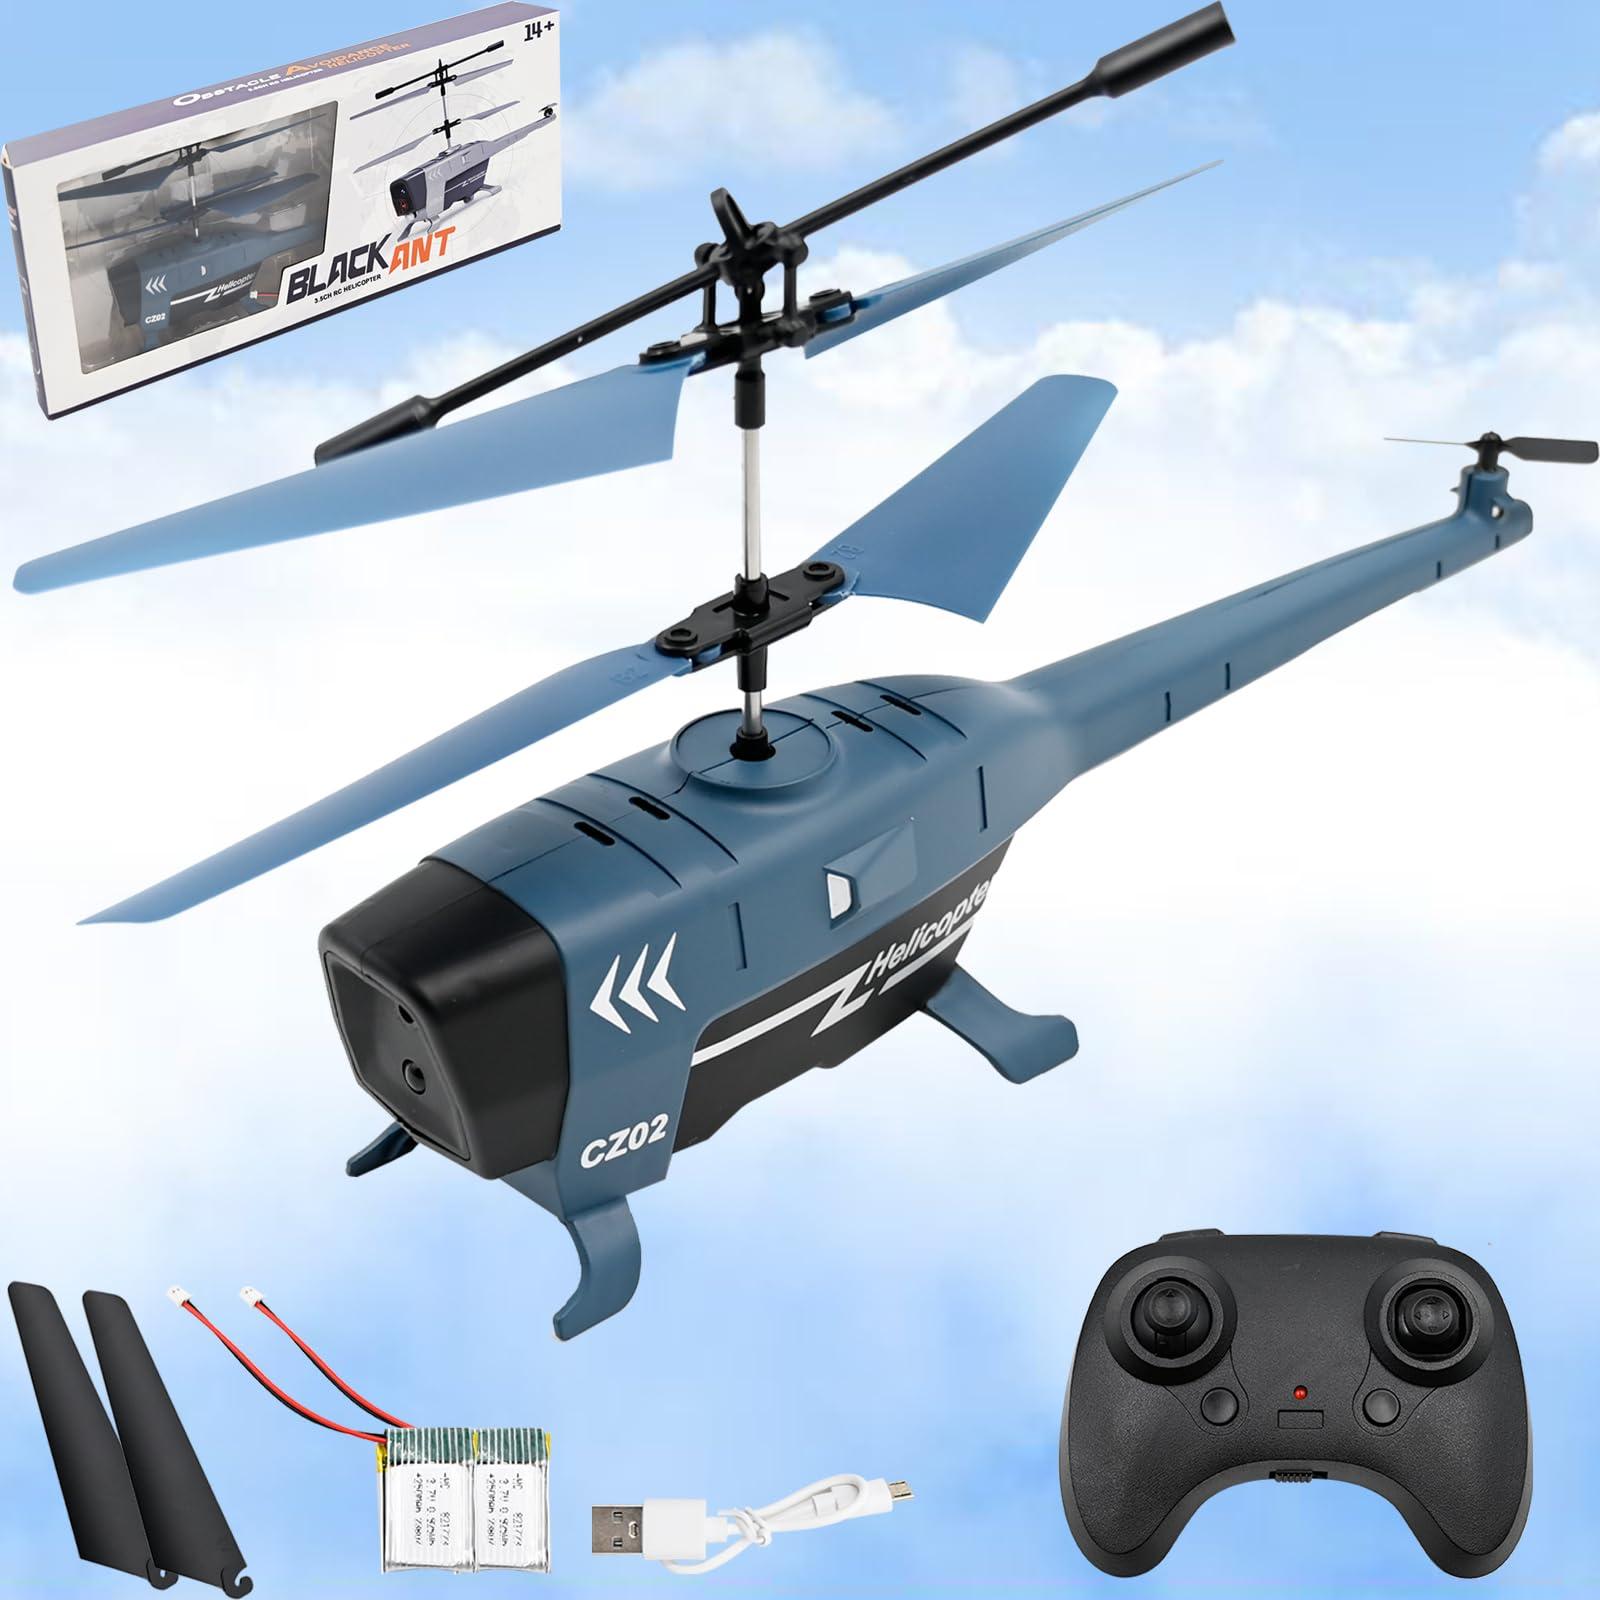 2Nd Hand Rc Helicopters For Sale: Negotiate the Price for 2nd Hand RC Helicopters